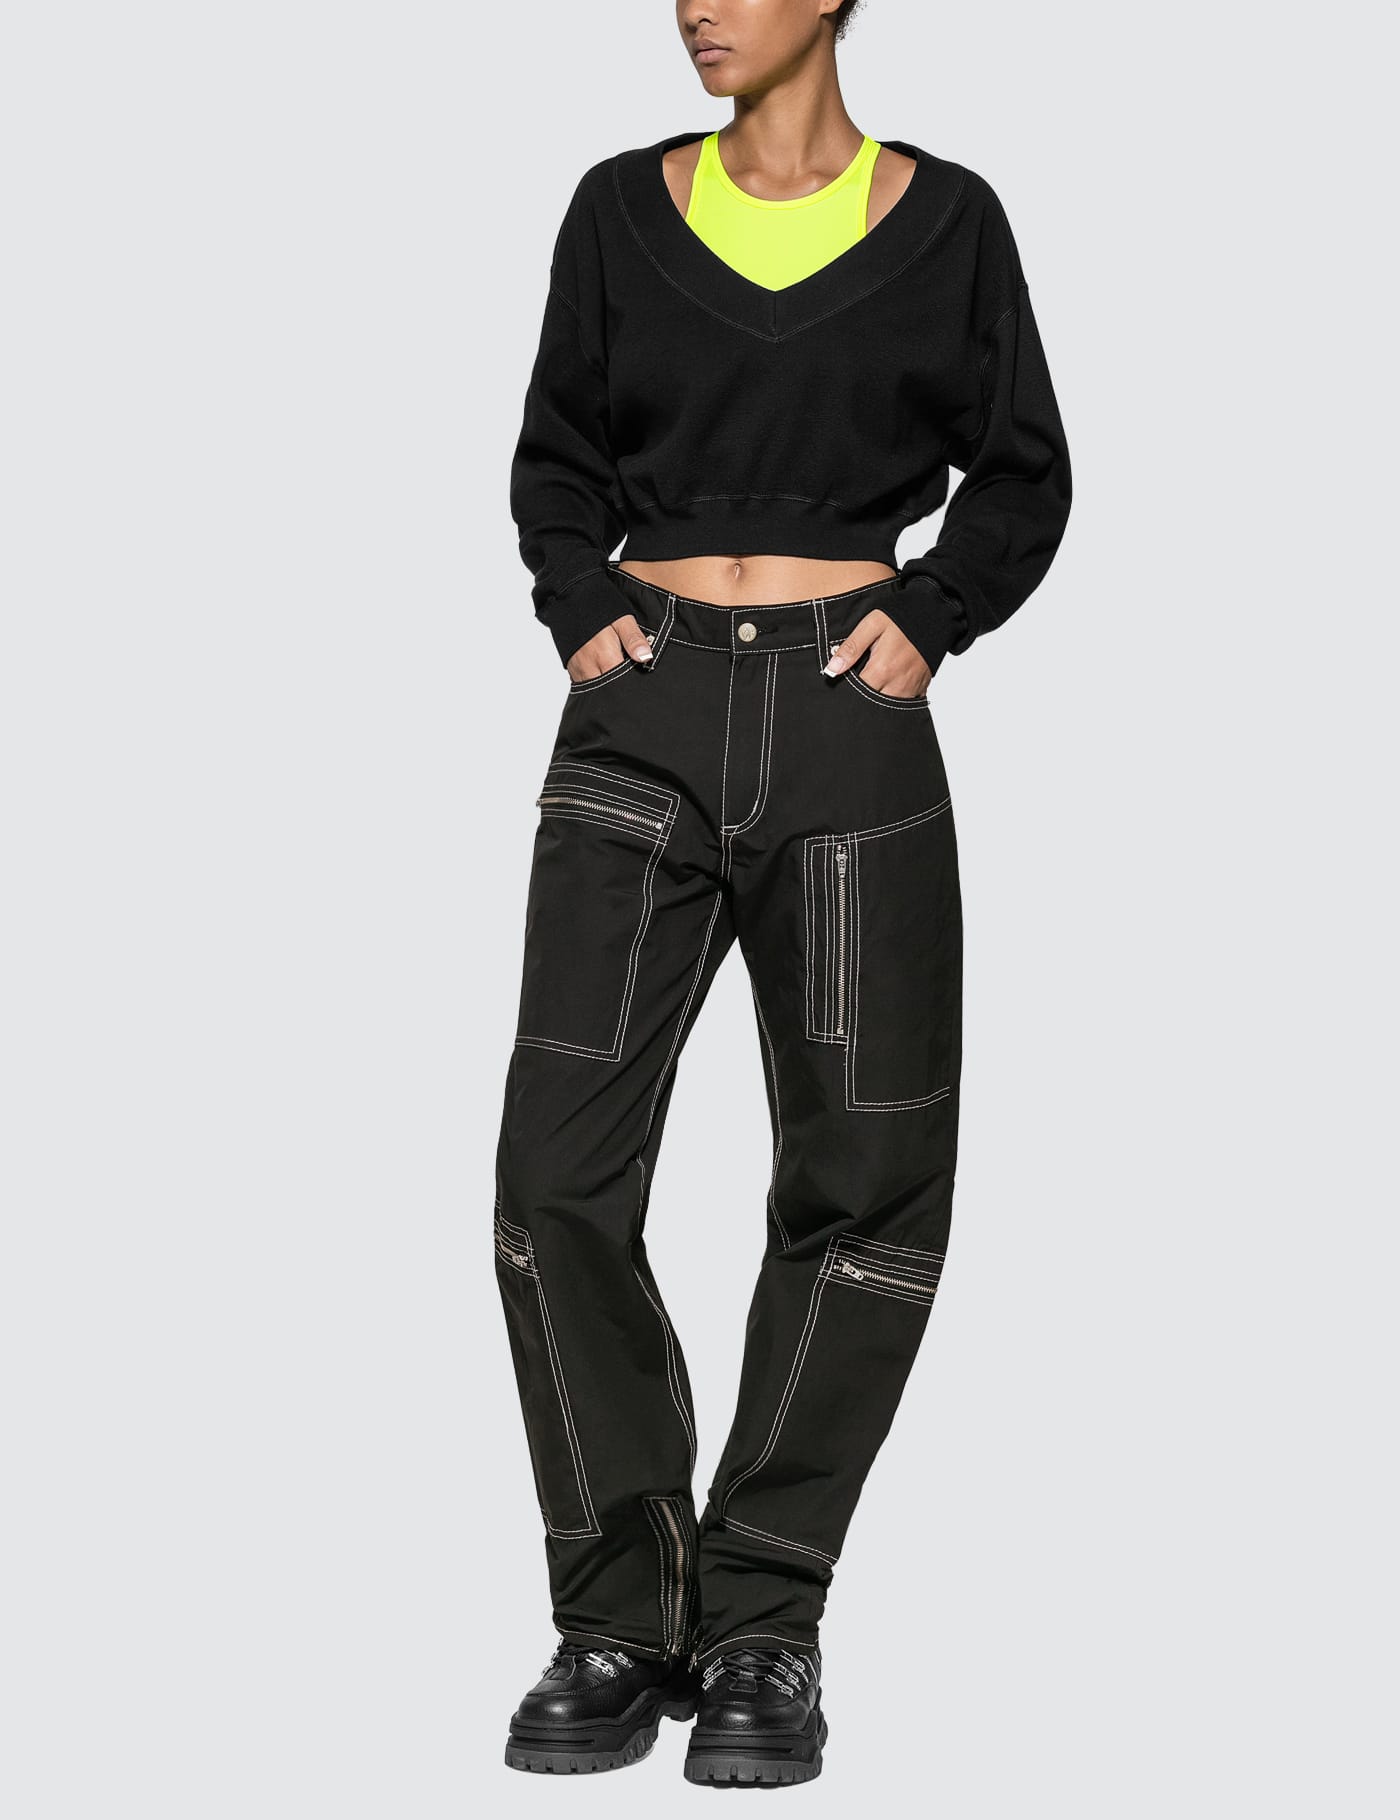 Eytys - Benz MK Tech Pants | HBX - Globally Curated Fashion and 